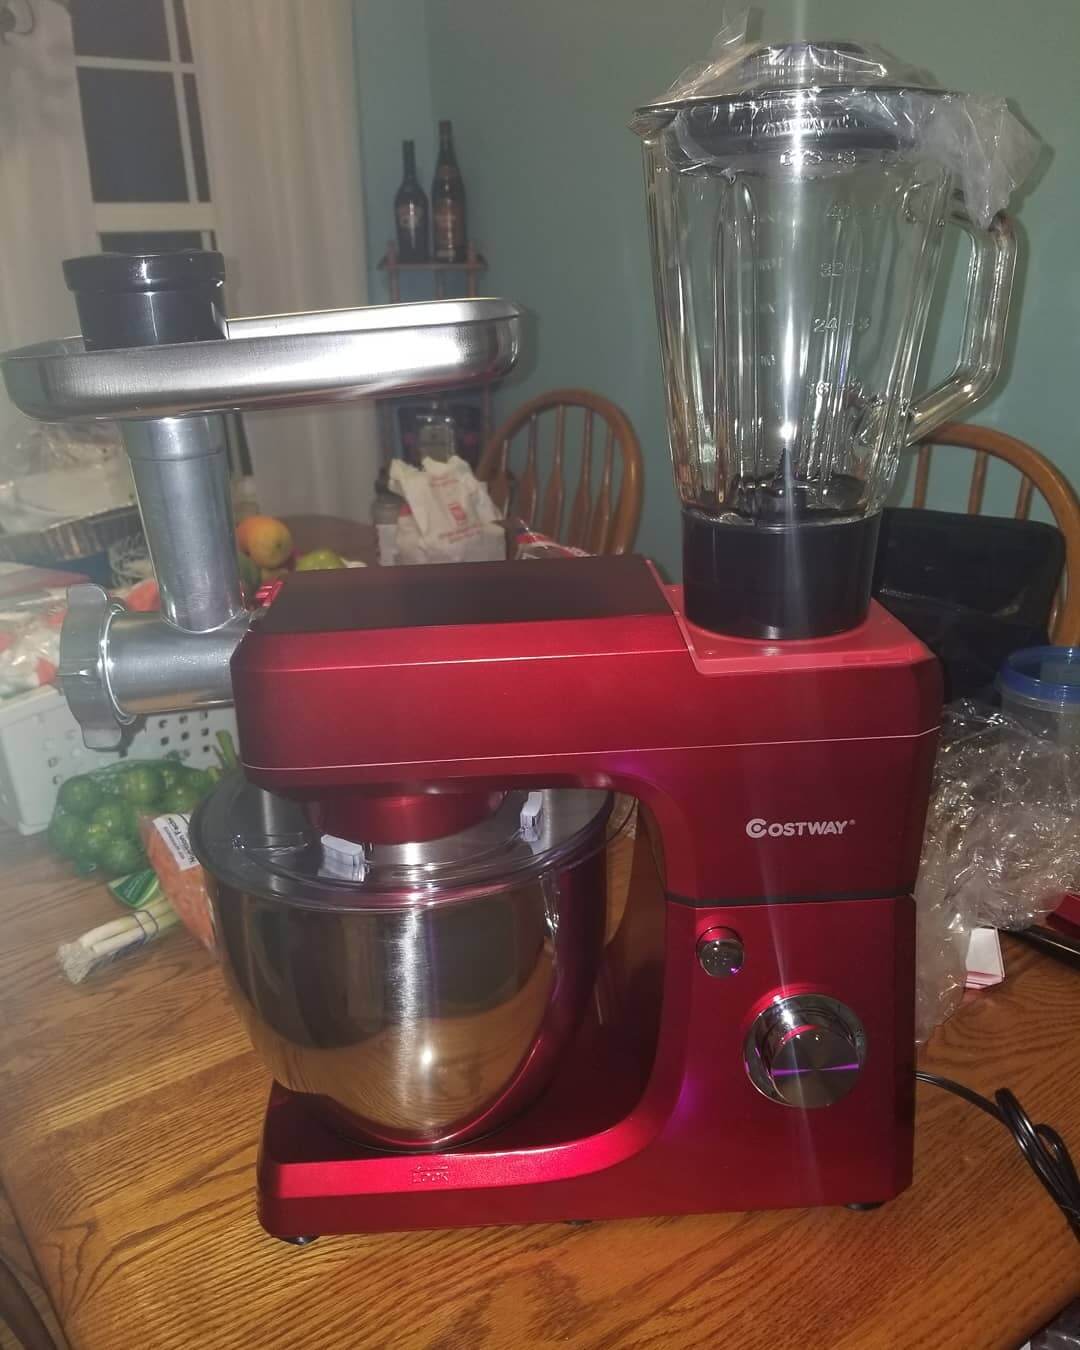 This stand mixer  works really good.